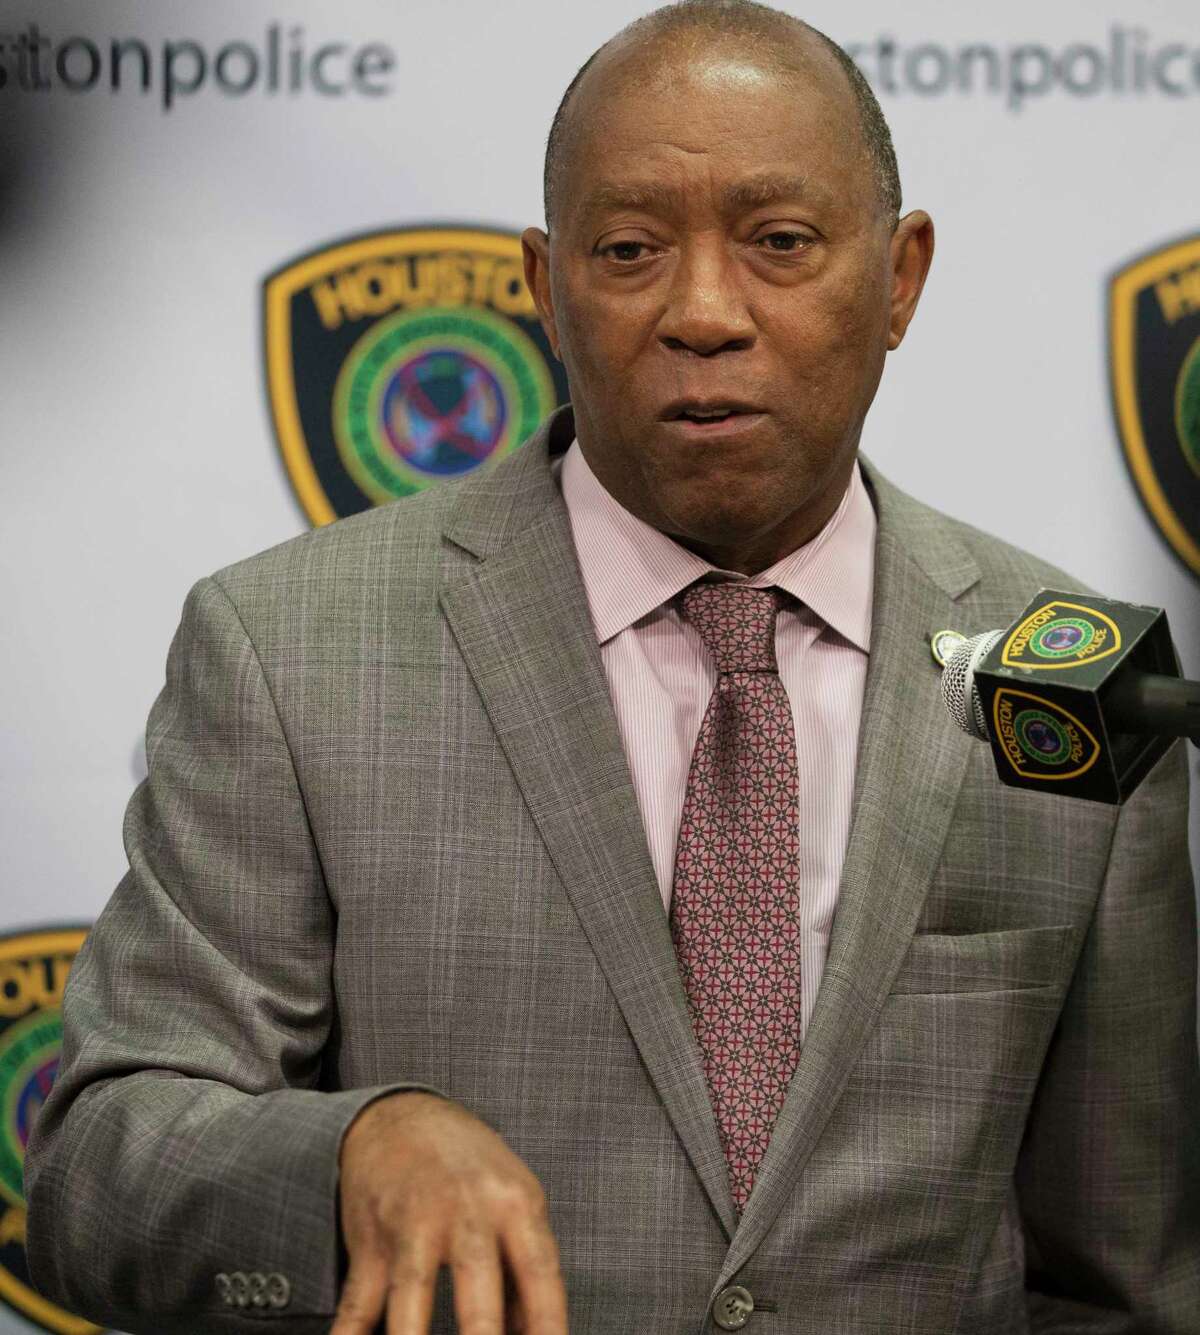 As of late Friday afternoon, Mayor Sylvester Turner said city officials had heard nothing of planned immigration raids in Houston. He said he would announce any changes on Twitter.